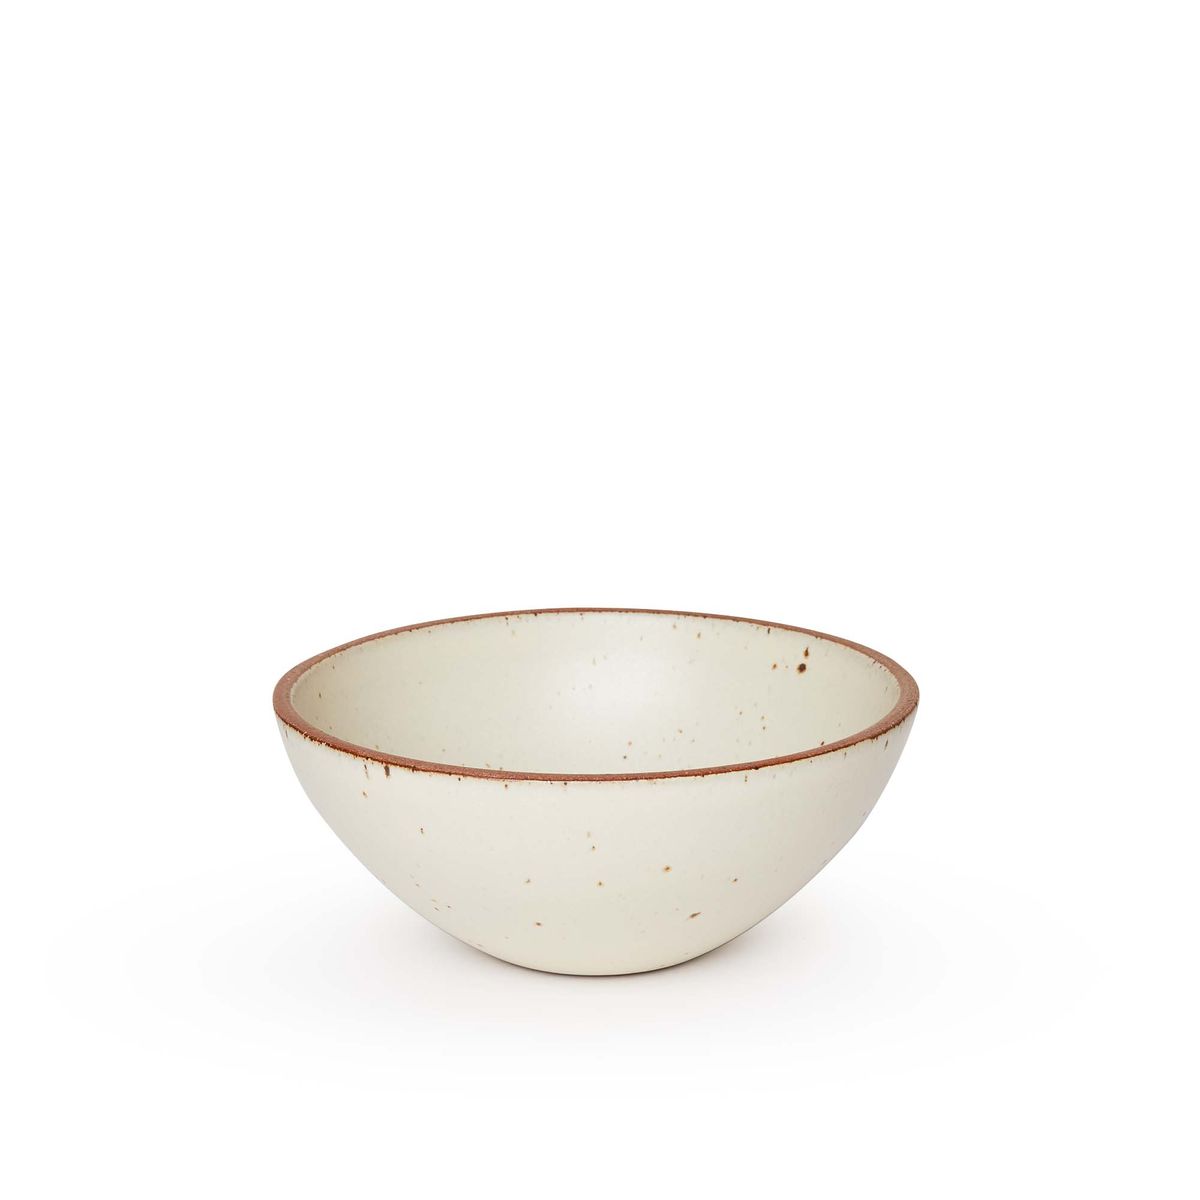 A medium rounded ceramic bowl in a warm, tan-toned, off-white color featuring iron speckles and an unglazed rim